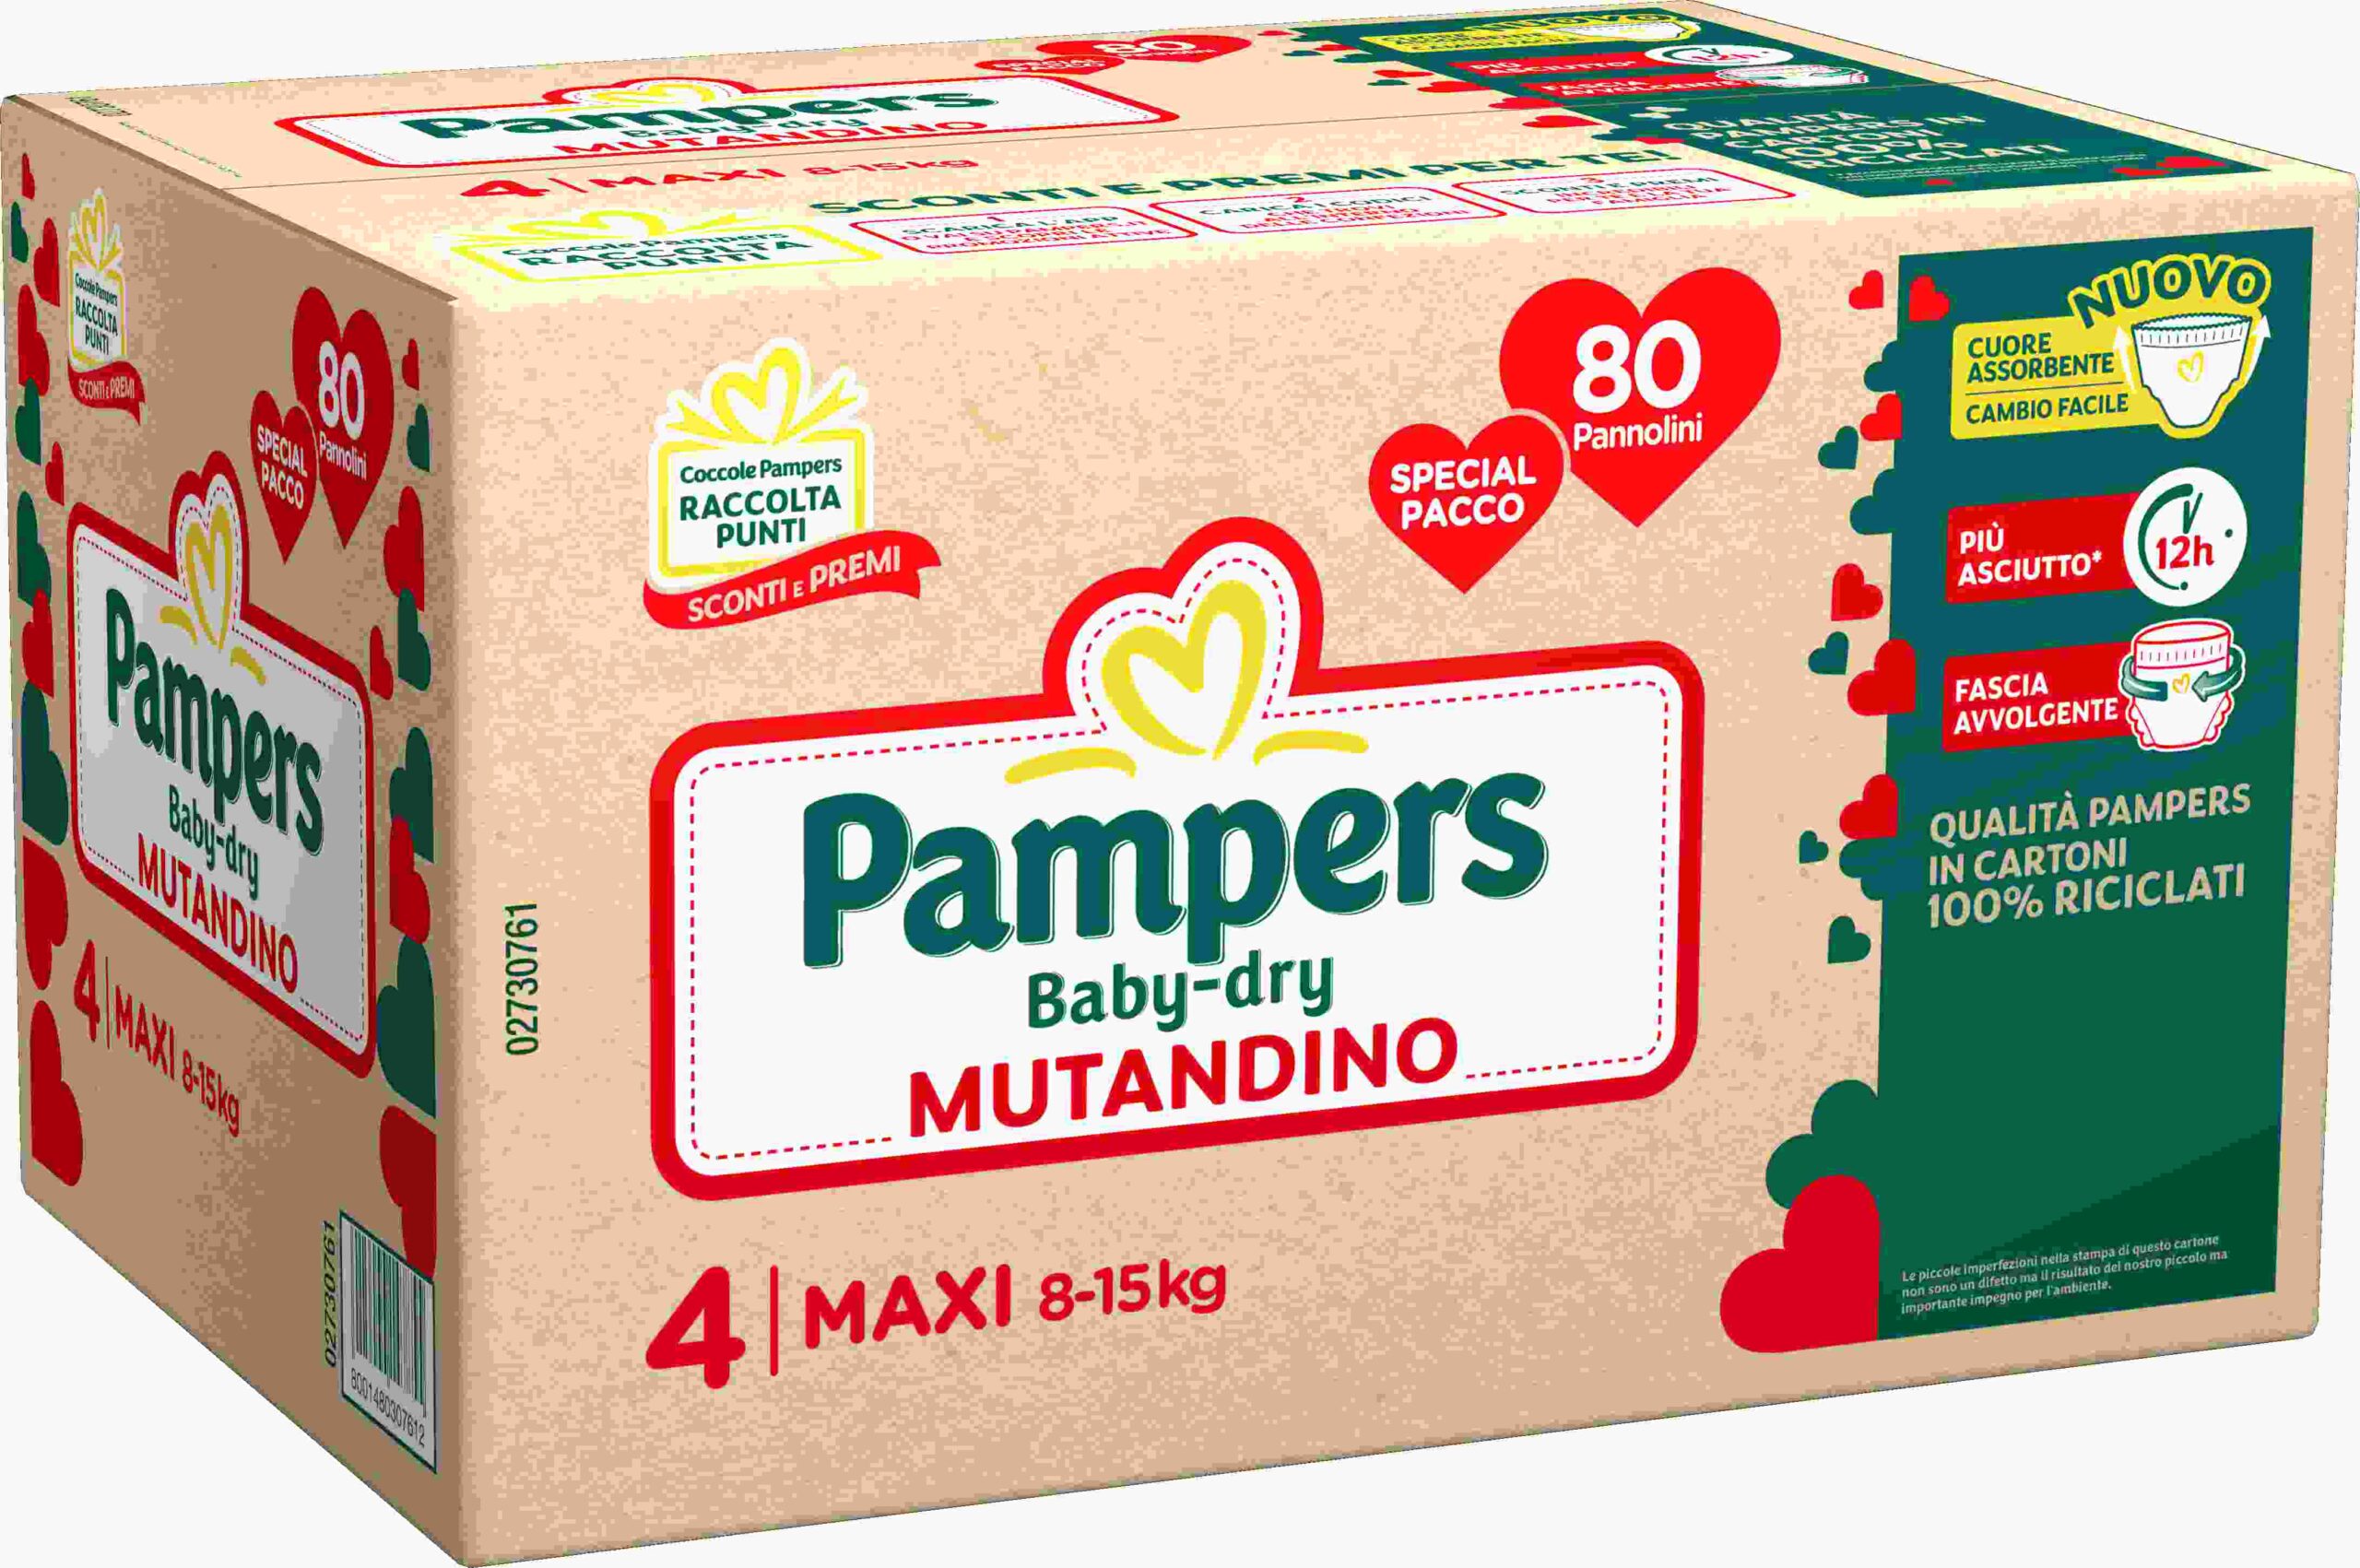 Pampers baby-dry mutandino special maxi 80 pz - Pampers